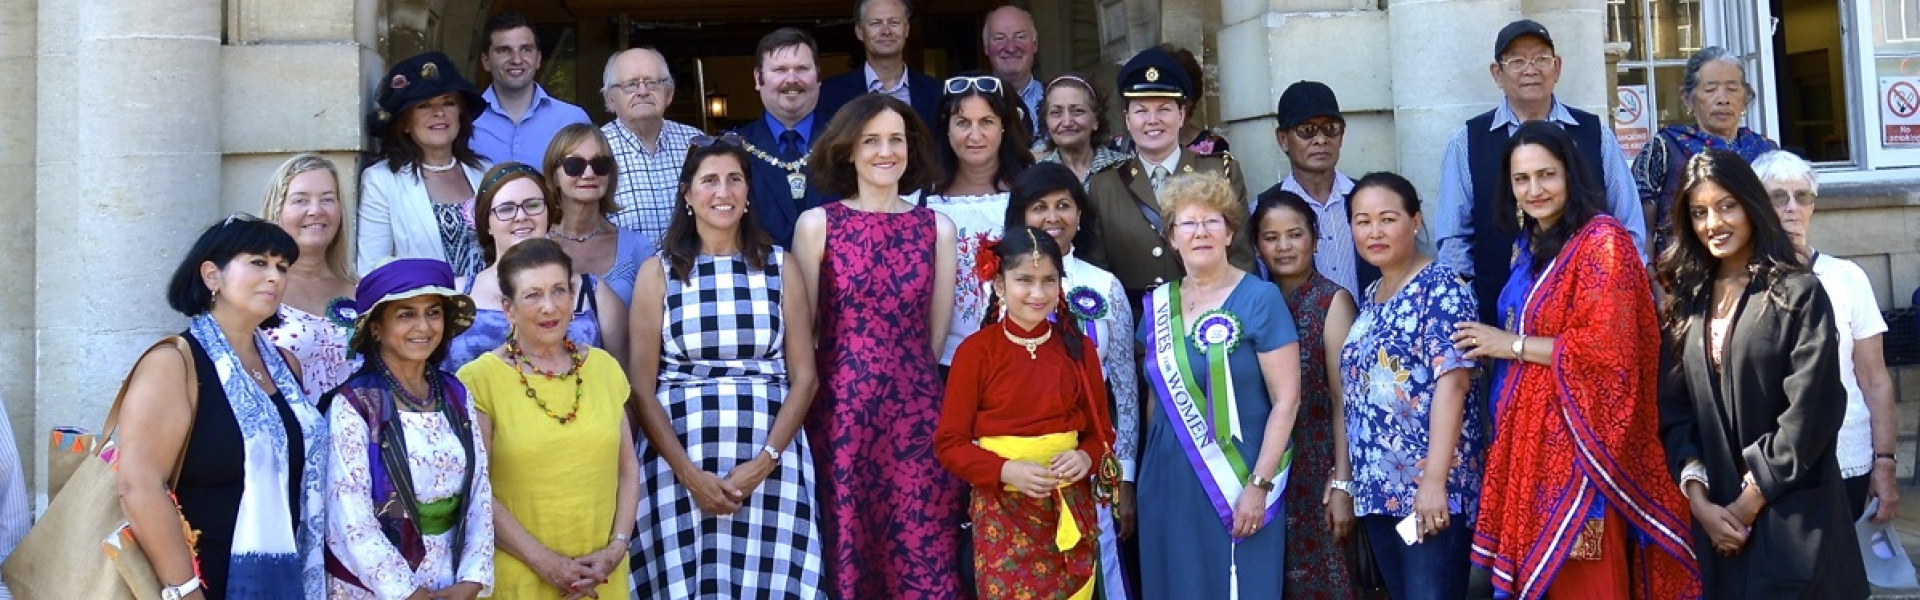 Villiers attends Pankhurst party to celebrate suffragettes